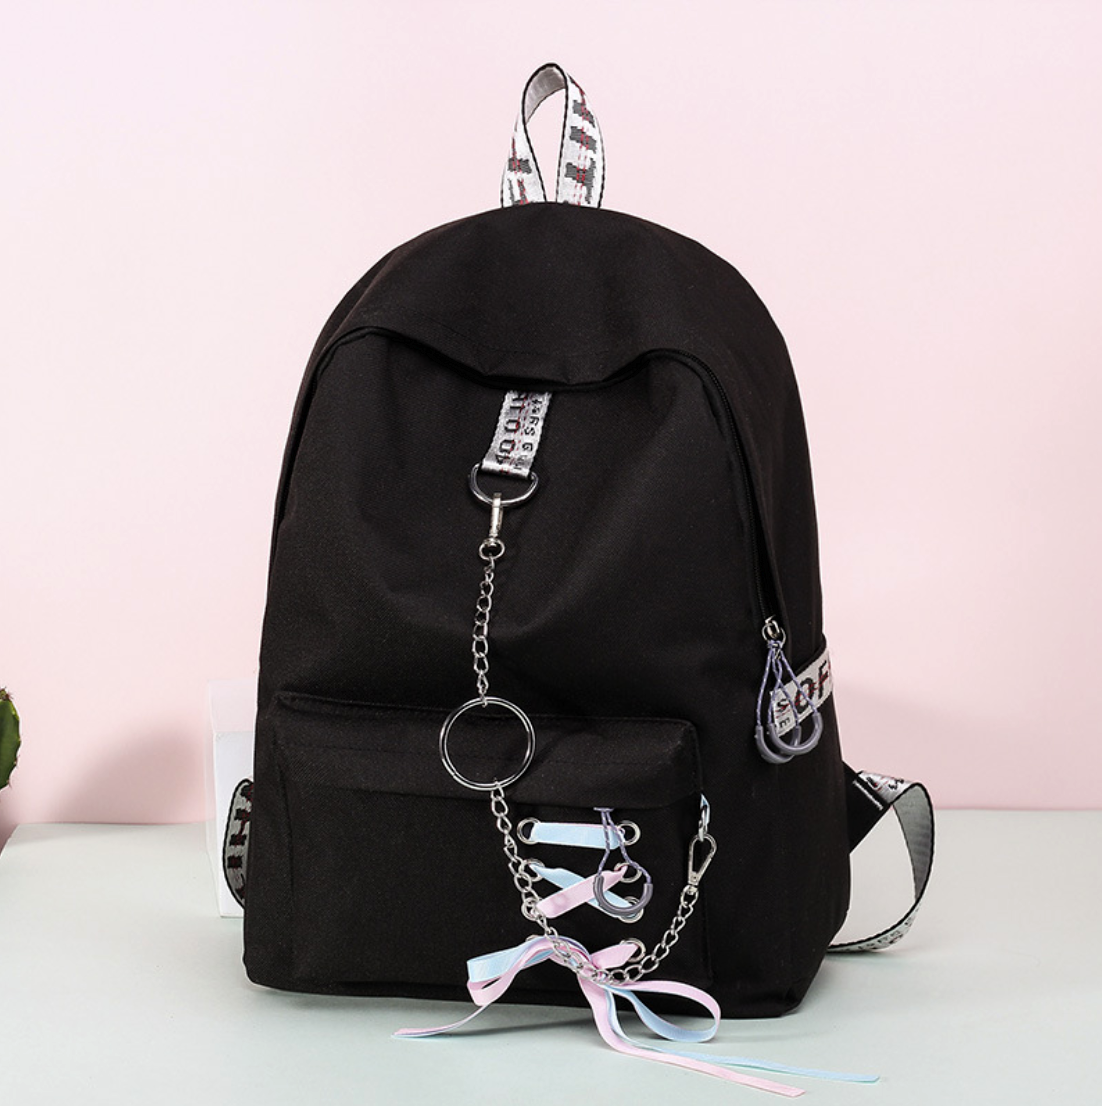 Taito Travel Backpack Classic Black - Tokyobags.co